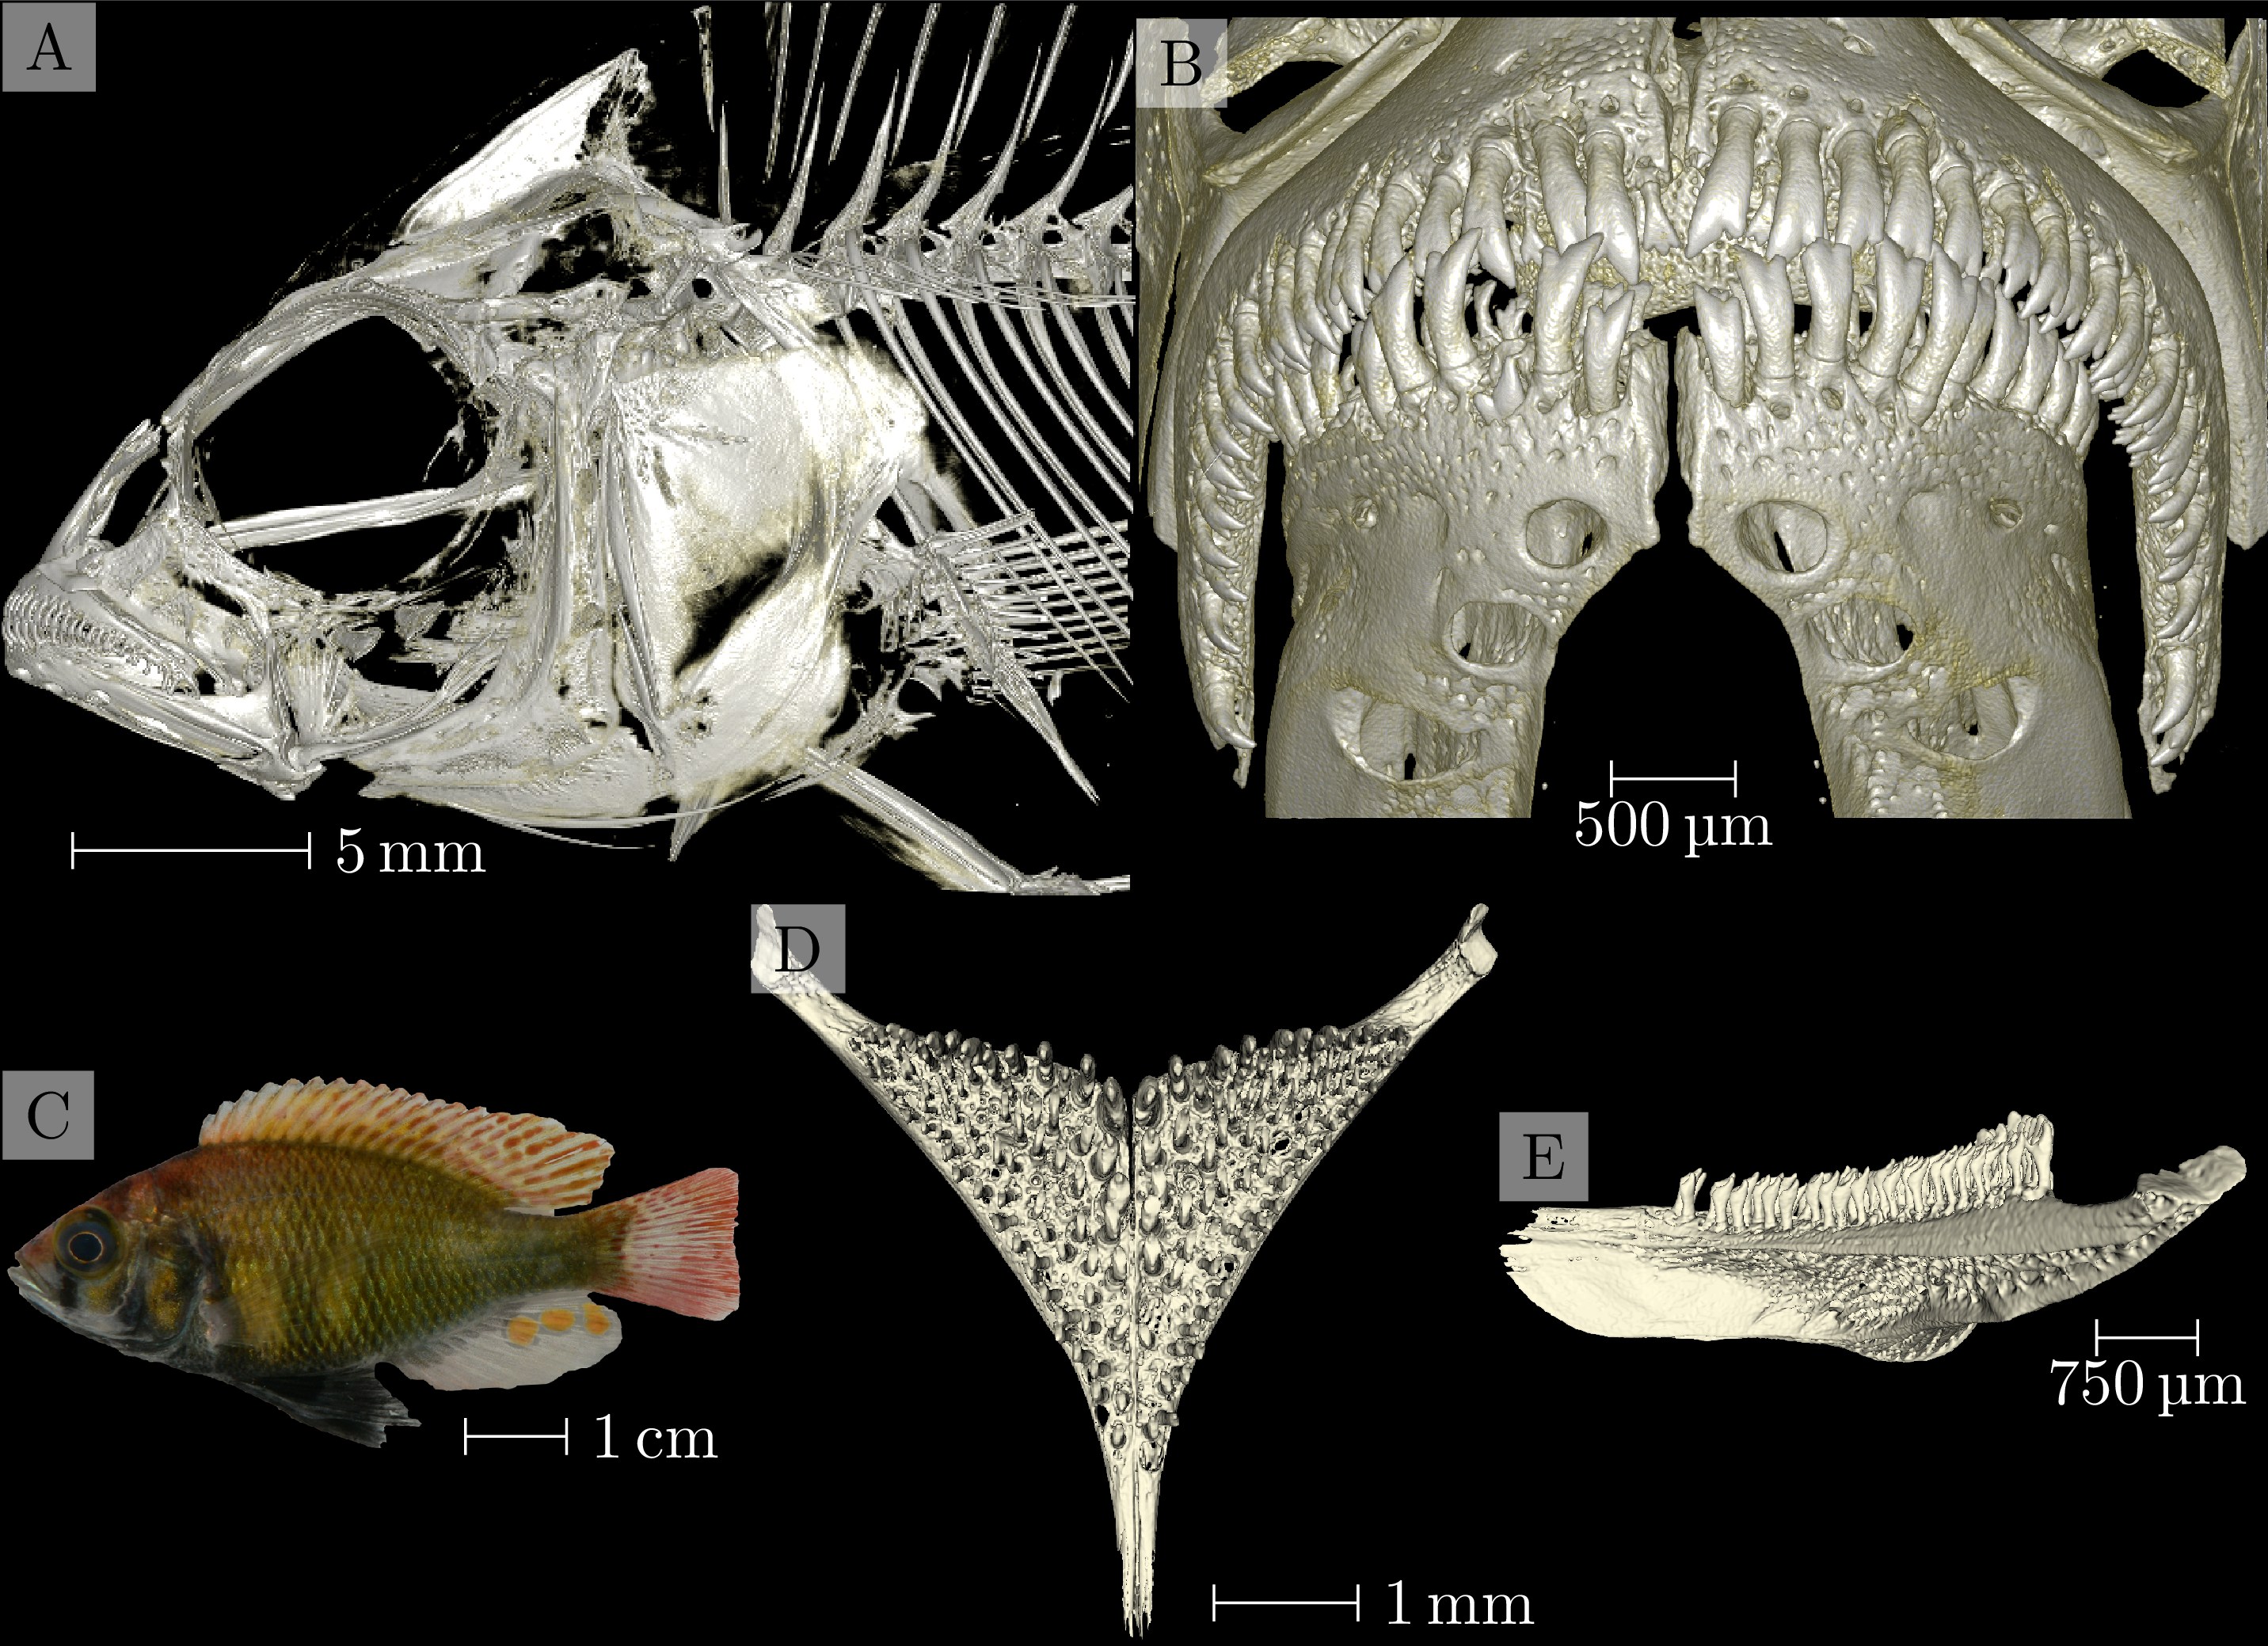 Figure 1: Overview of data from sample 104016, Enterochromis I cinctus (St. E). Panel A: Three-dimensional visualization of the head scan. Panel B: Three-dimensional visualization of the oral jaw scan. Panel C: Photograph of the specimen. Panels D and E: Three-dimensional visualization of the pharyngeal jaw, dorsoventral and lateral view, respectively.